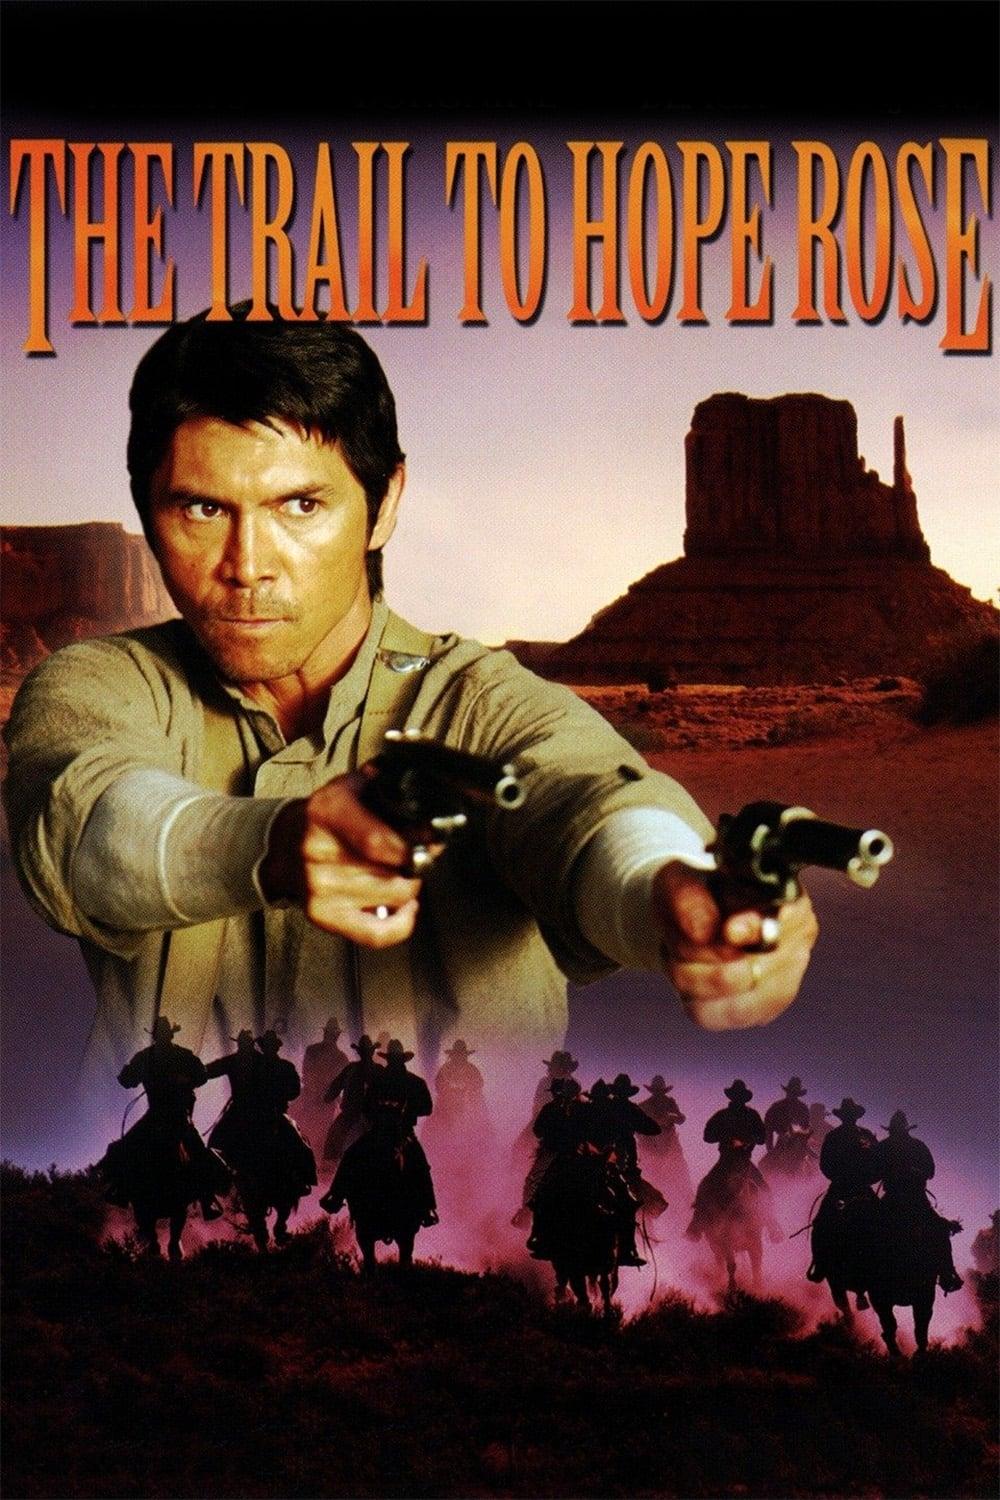 The Trail to Hope Rose poster